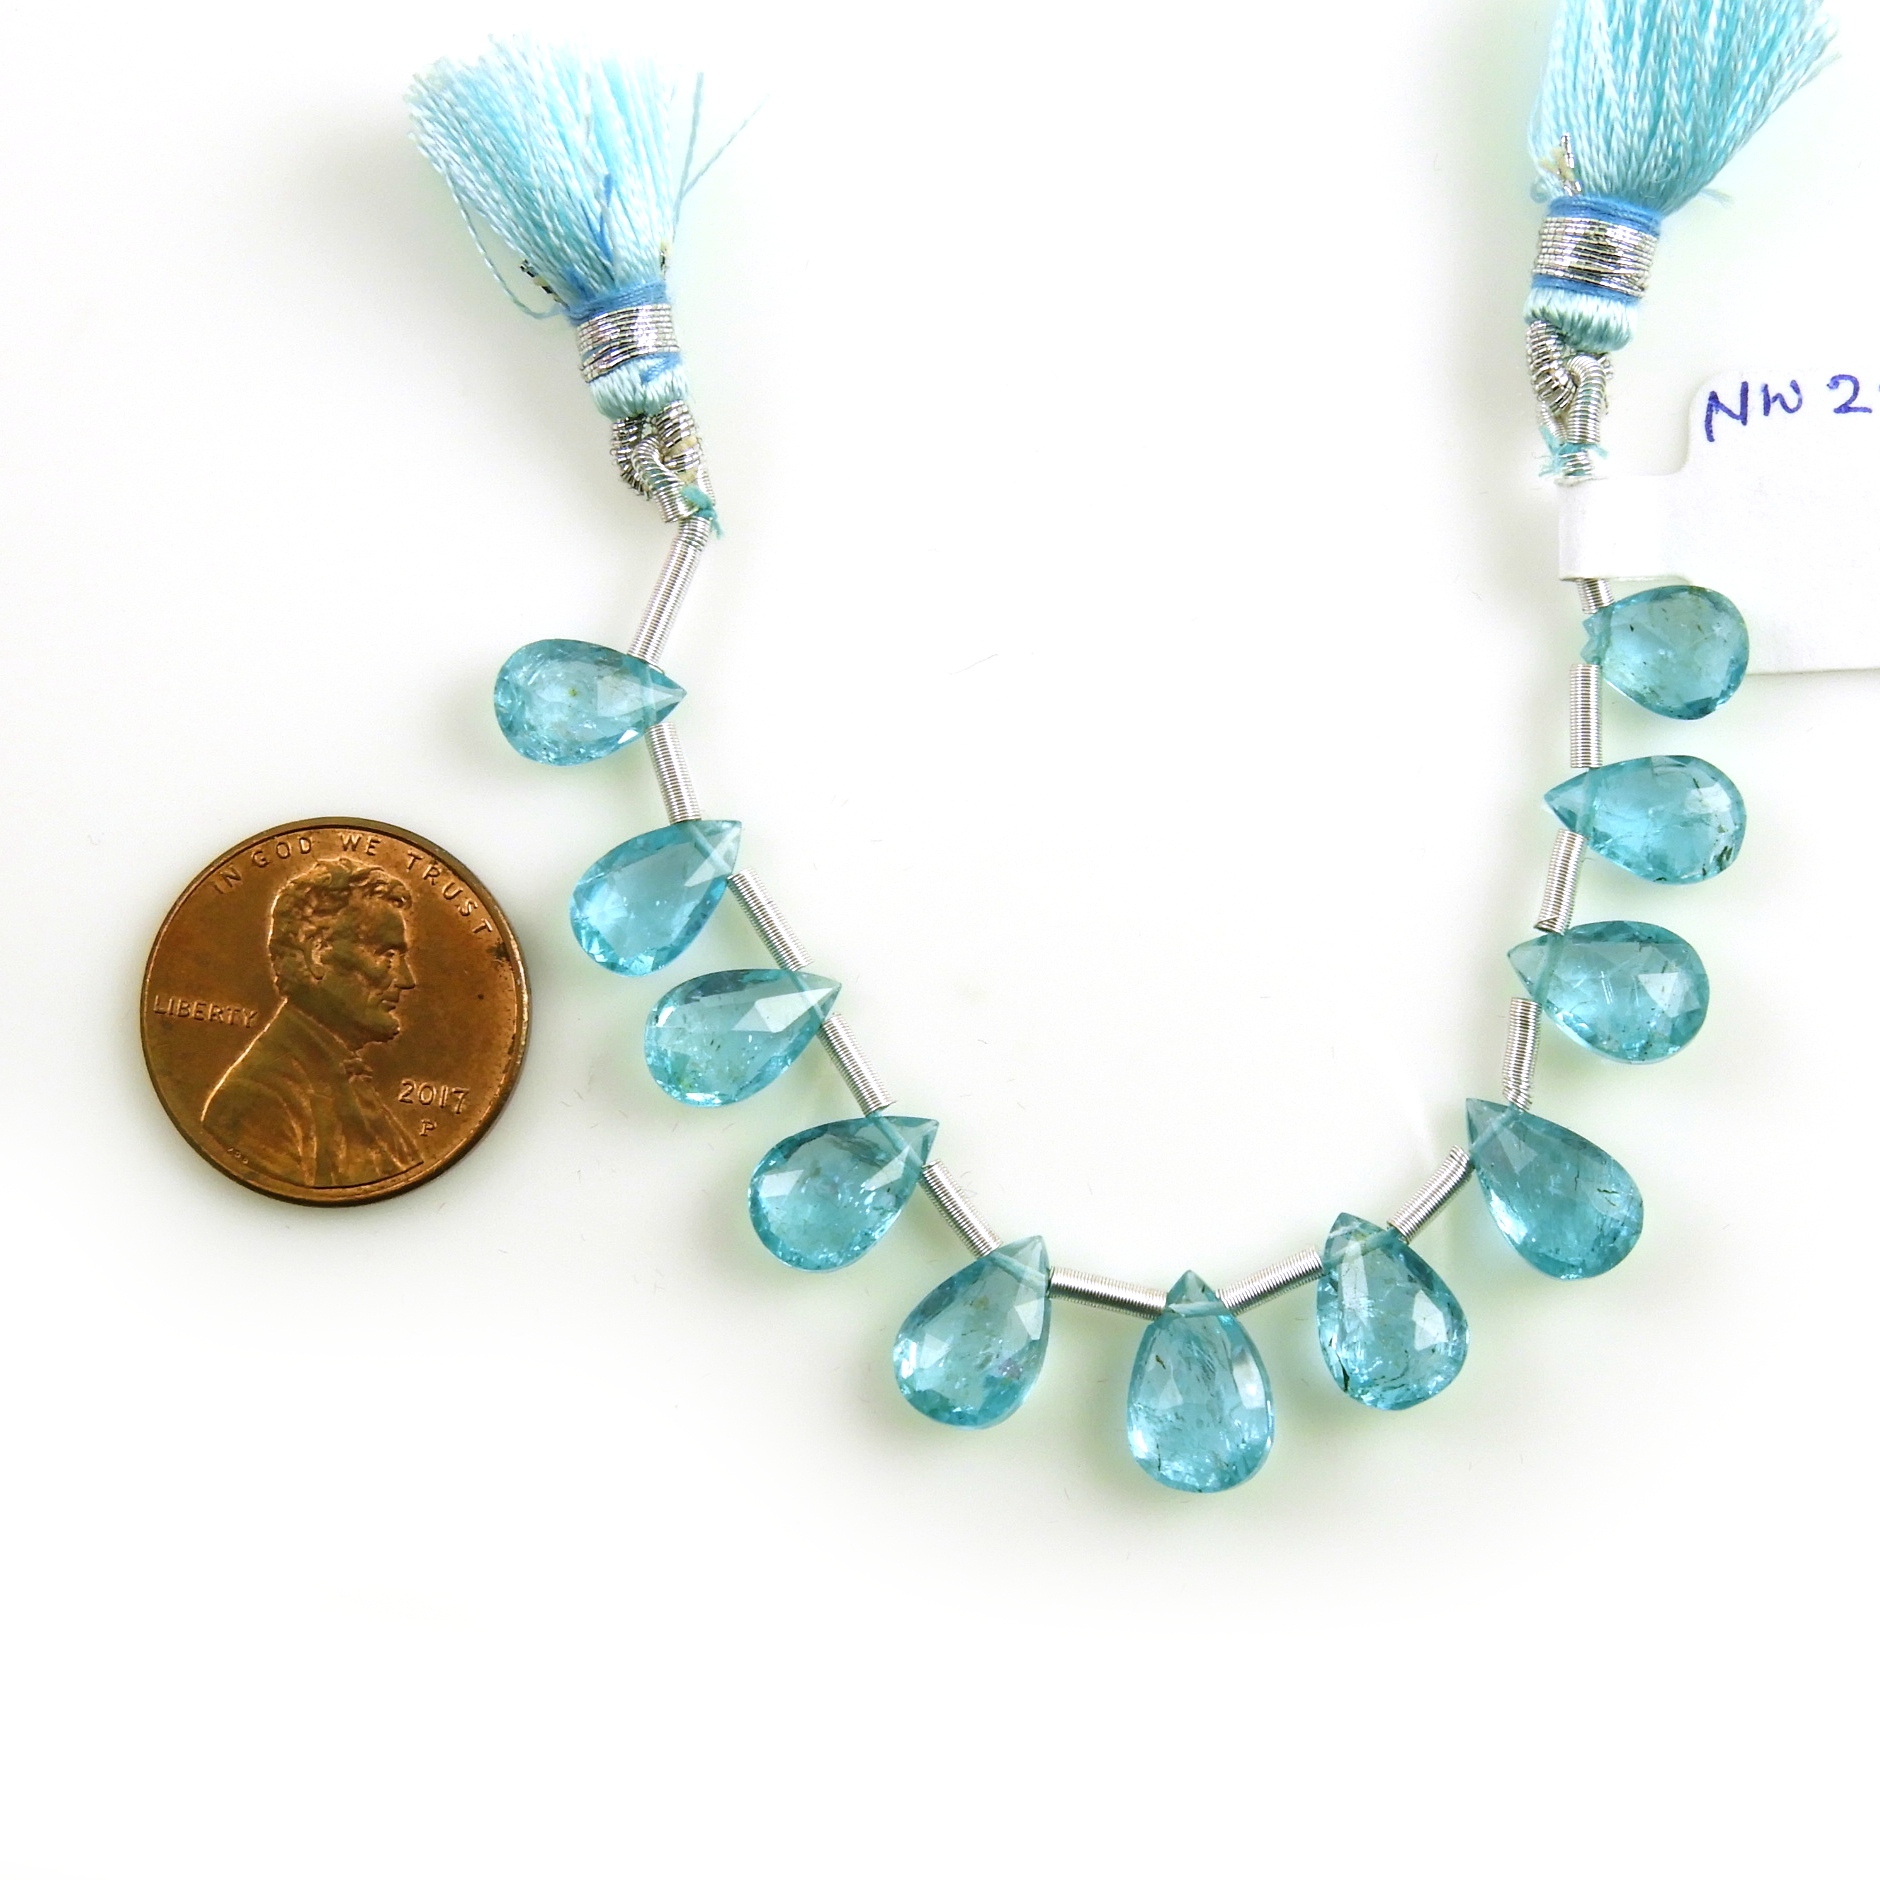 blue apatite - know information about